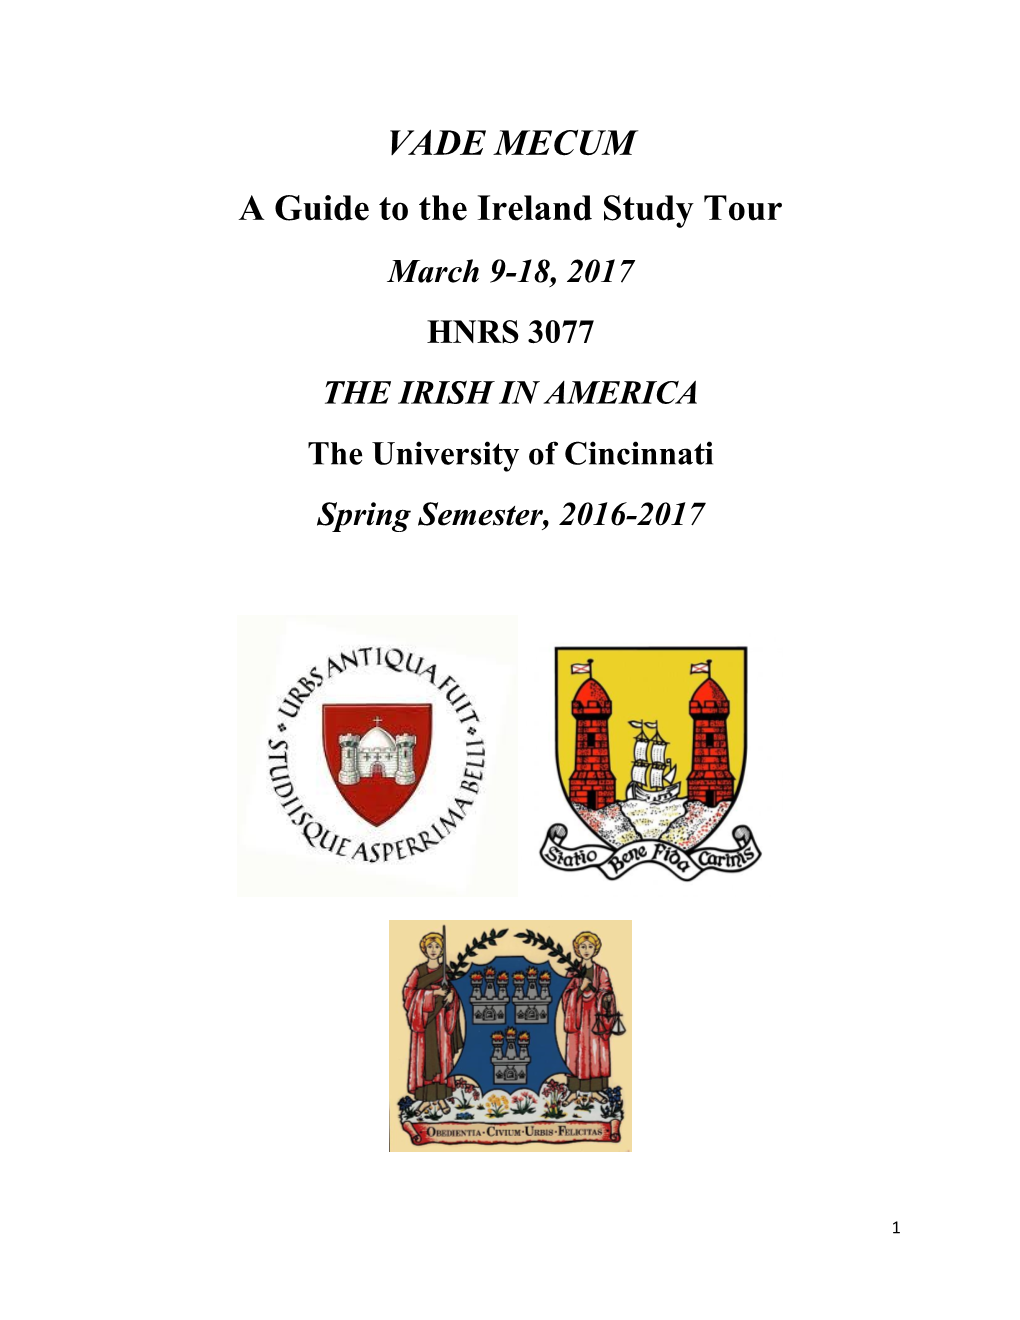 VADE MECUM a Guide to the Ireland Study Tour March 9-18, 2017 HNRS 3077 the IRISH in AMERICA the University of Cincinnati Spring Semester, 2016-2017